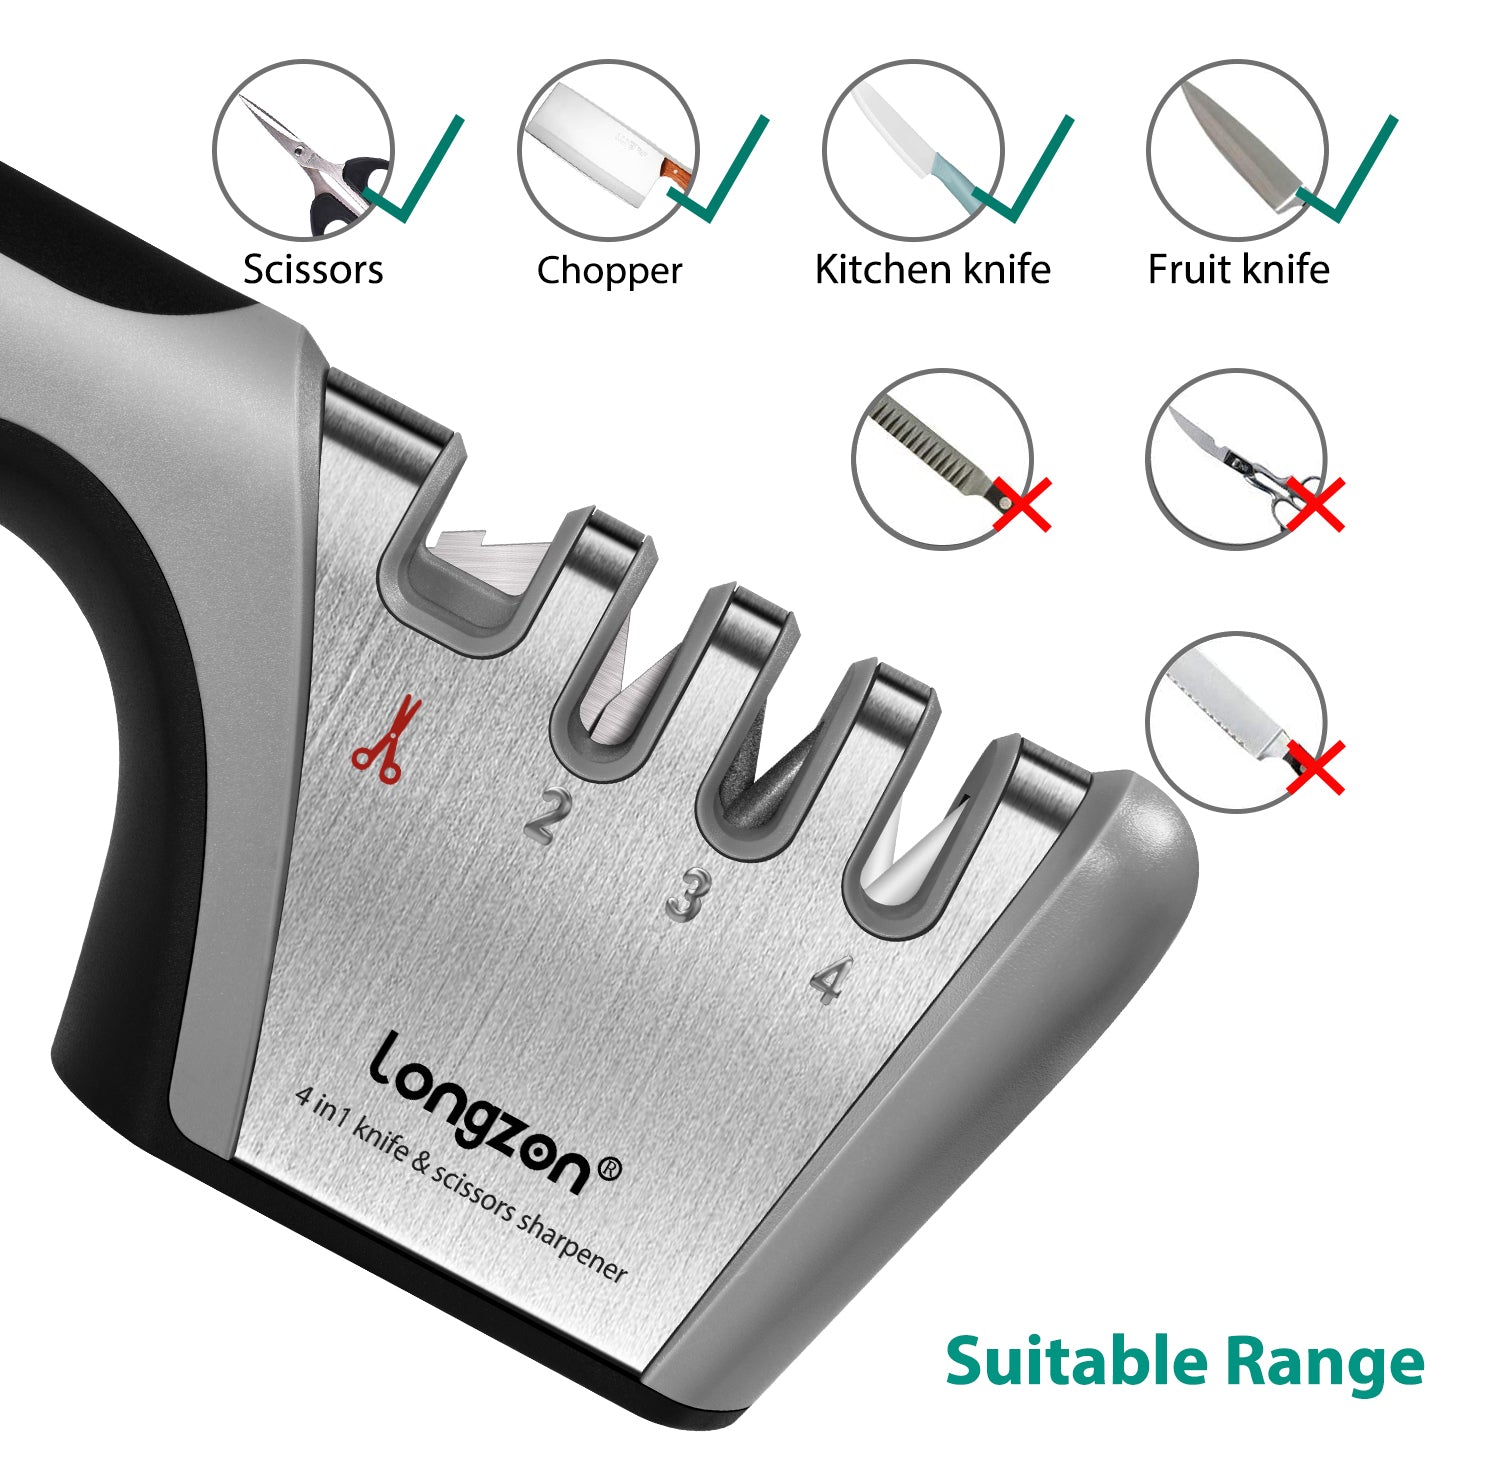 4 IN 1 Knife Sharpener, 4-Stage Knife Sharpening Tool Multifunctional  Kitchen Knife Scissor Sharpener with the Diamond, Ceramic, and Tungsten  Steel